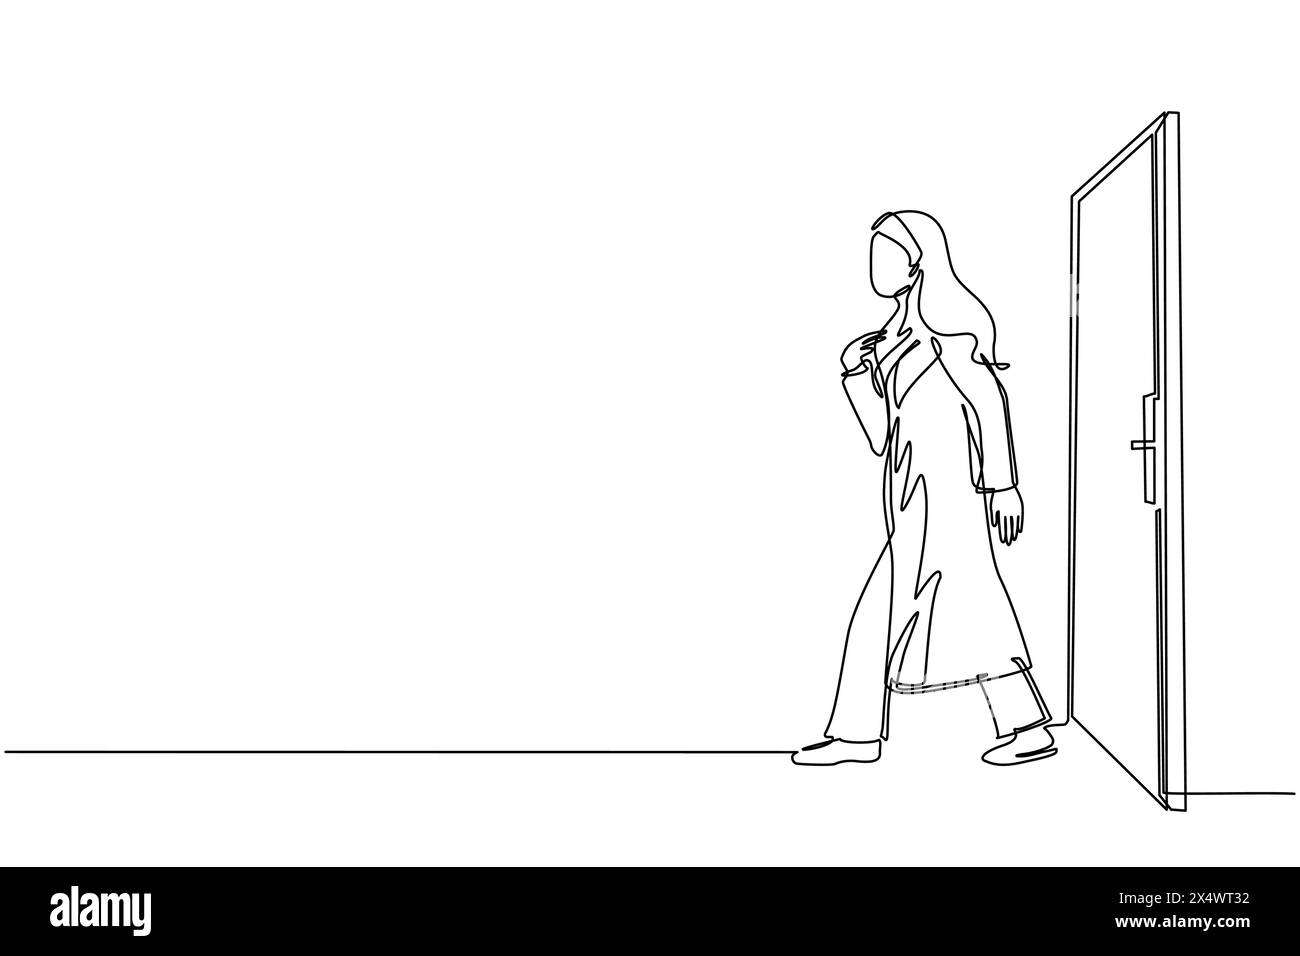 Single continuous line drawing Arabic businesswoman walking and leaving closed door. New business ventures. Entering new market. Career growth concept Stock Vector